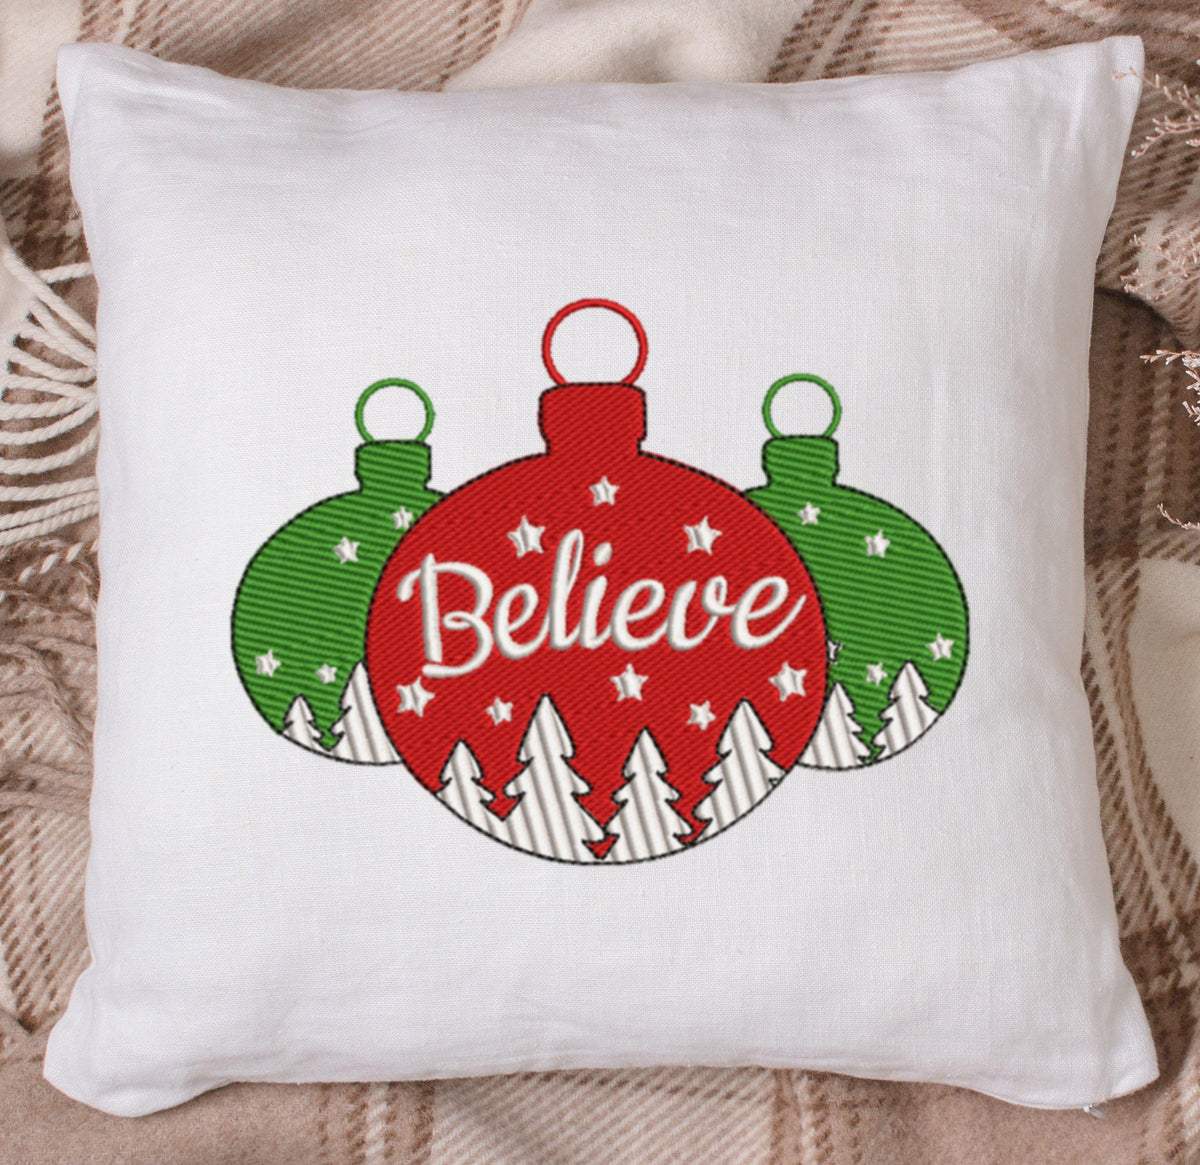 Ornament Believe Embroidery Design - Oh My Crafty Supplies Inc.